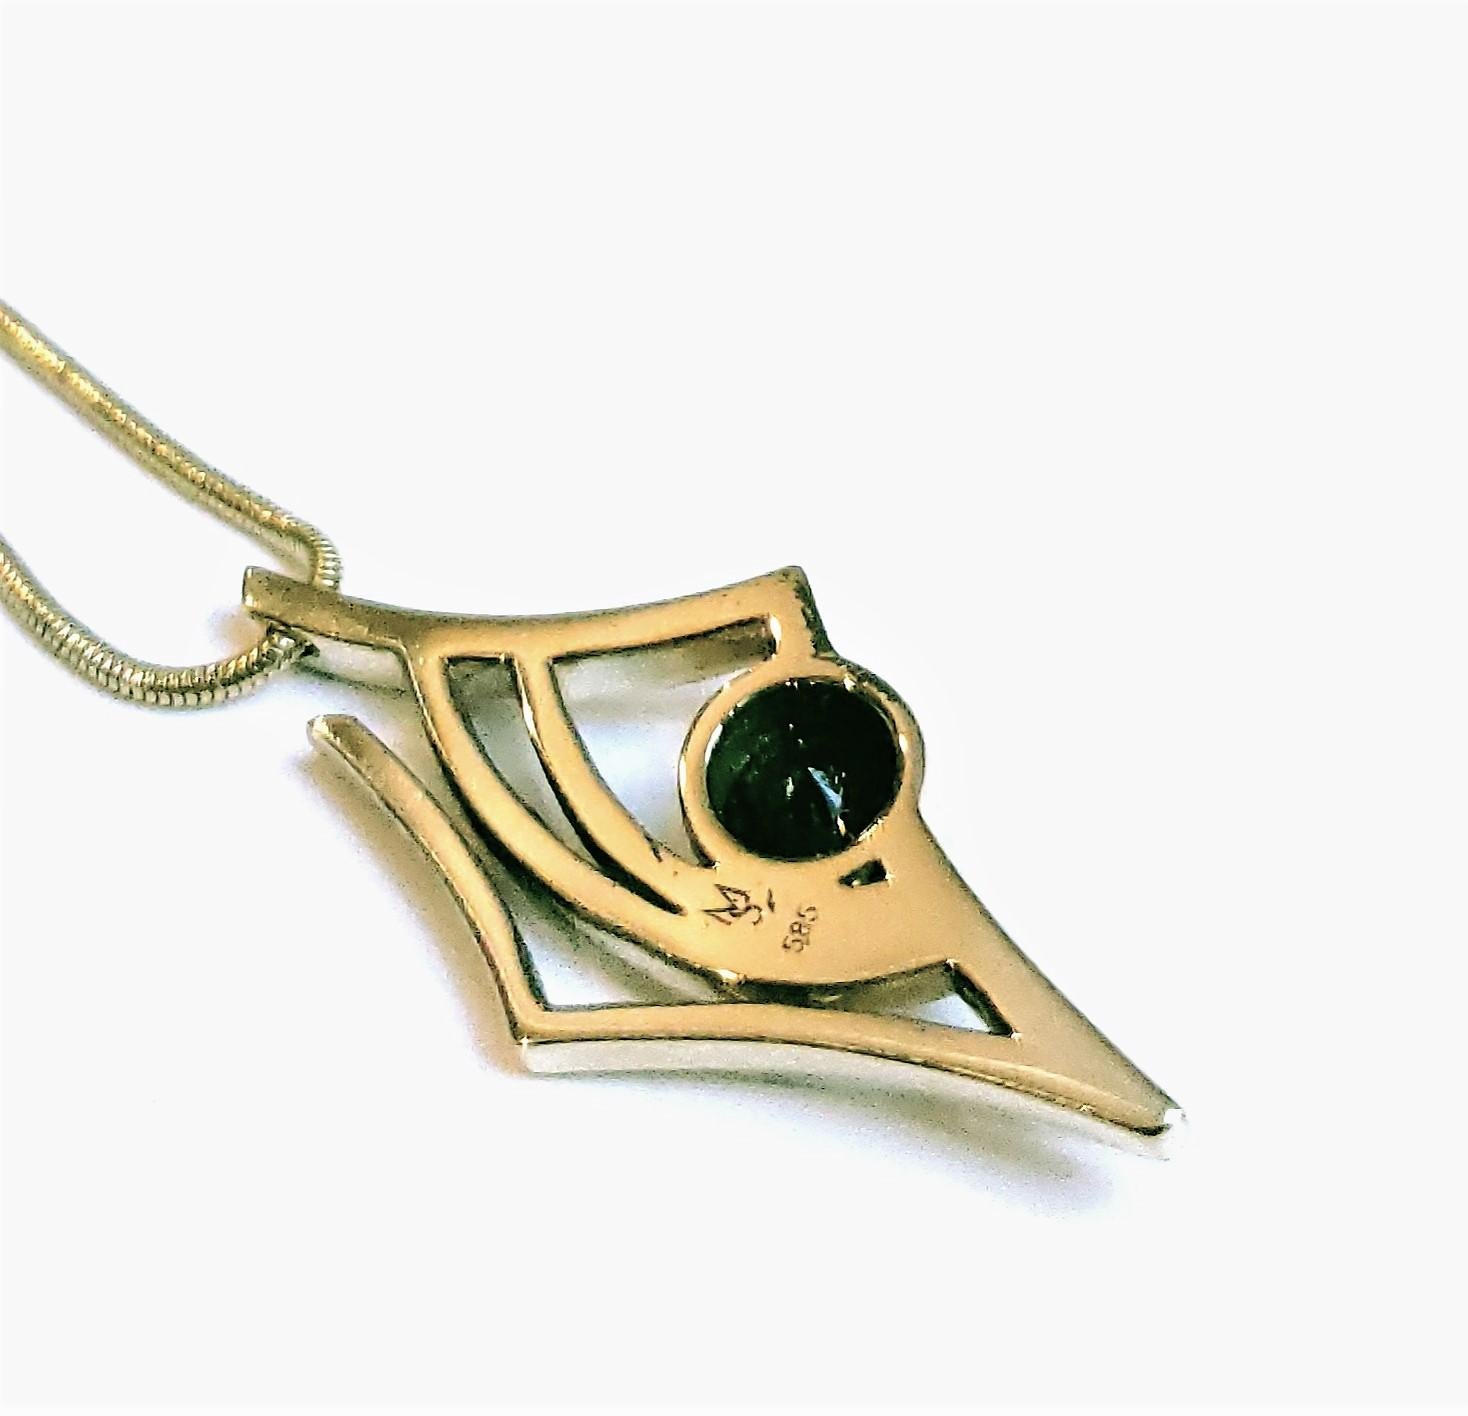 The Antares Origins 14k gold pendant ( 8.56 gms) with a 6mm center black diamond is surrounded by black diamond melee. Thirty - 1mm,  Ten - 1.4mm.  The pendant is 1-3/8